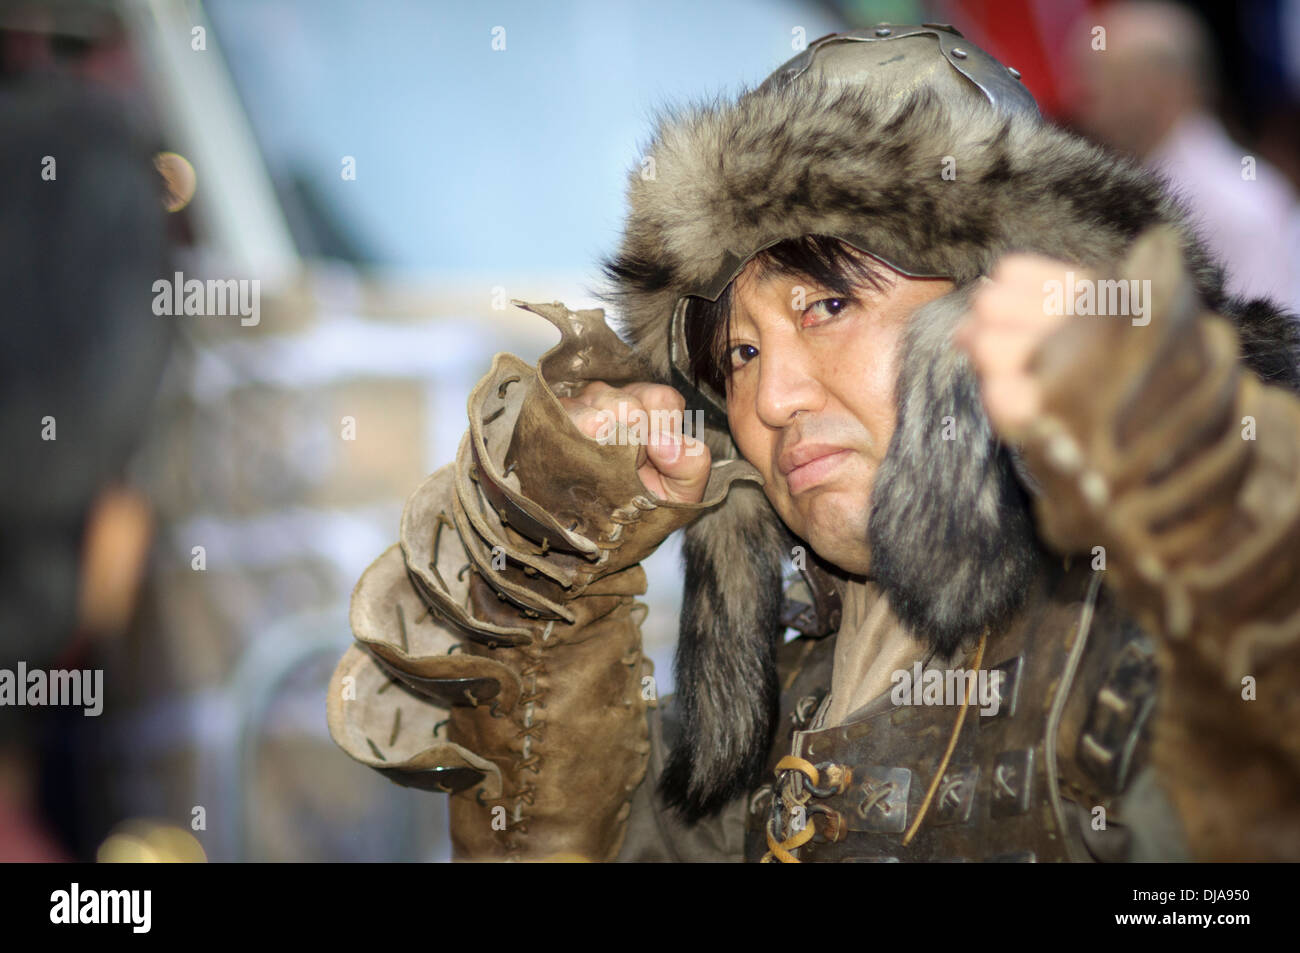 South Korean man striking a fighting pose while wearing traditional leather armour (armor), including fur hat, for cold climates Stock Photo